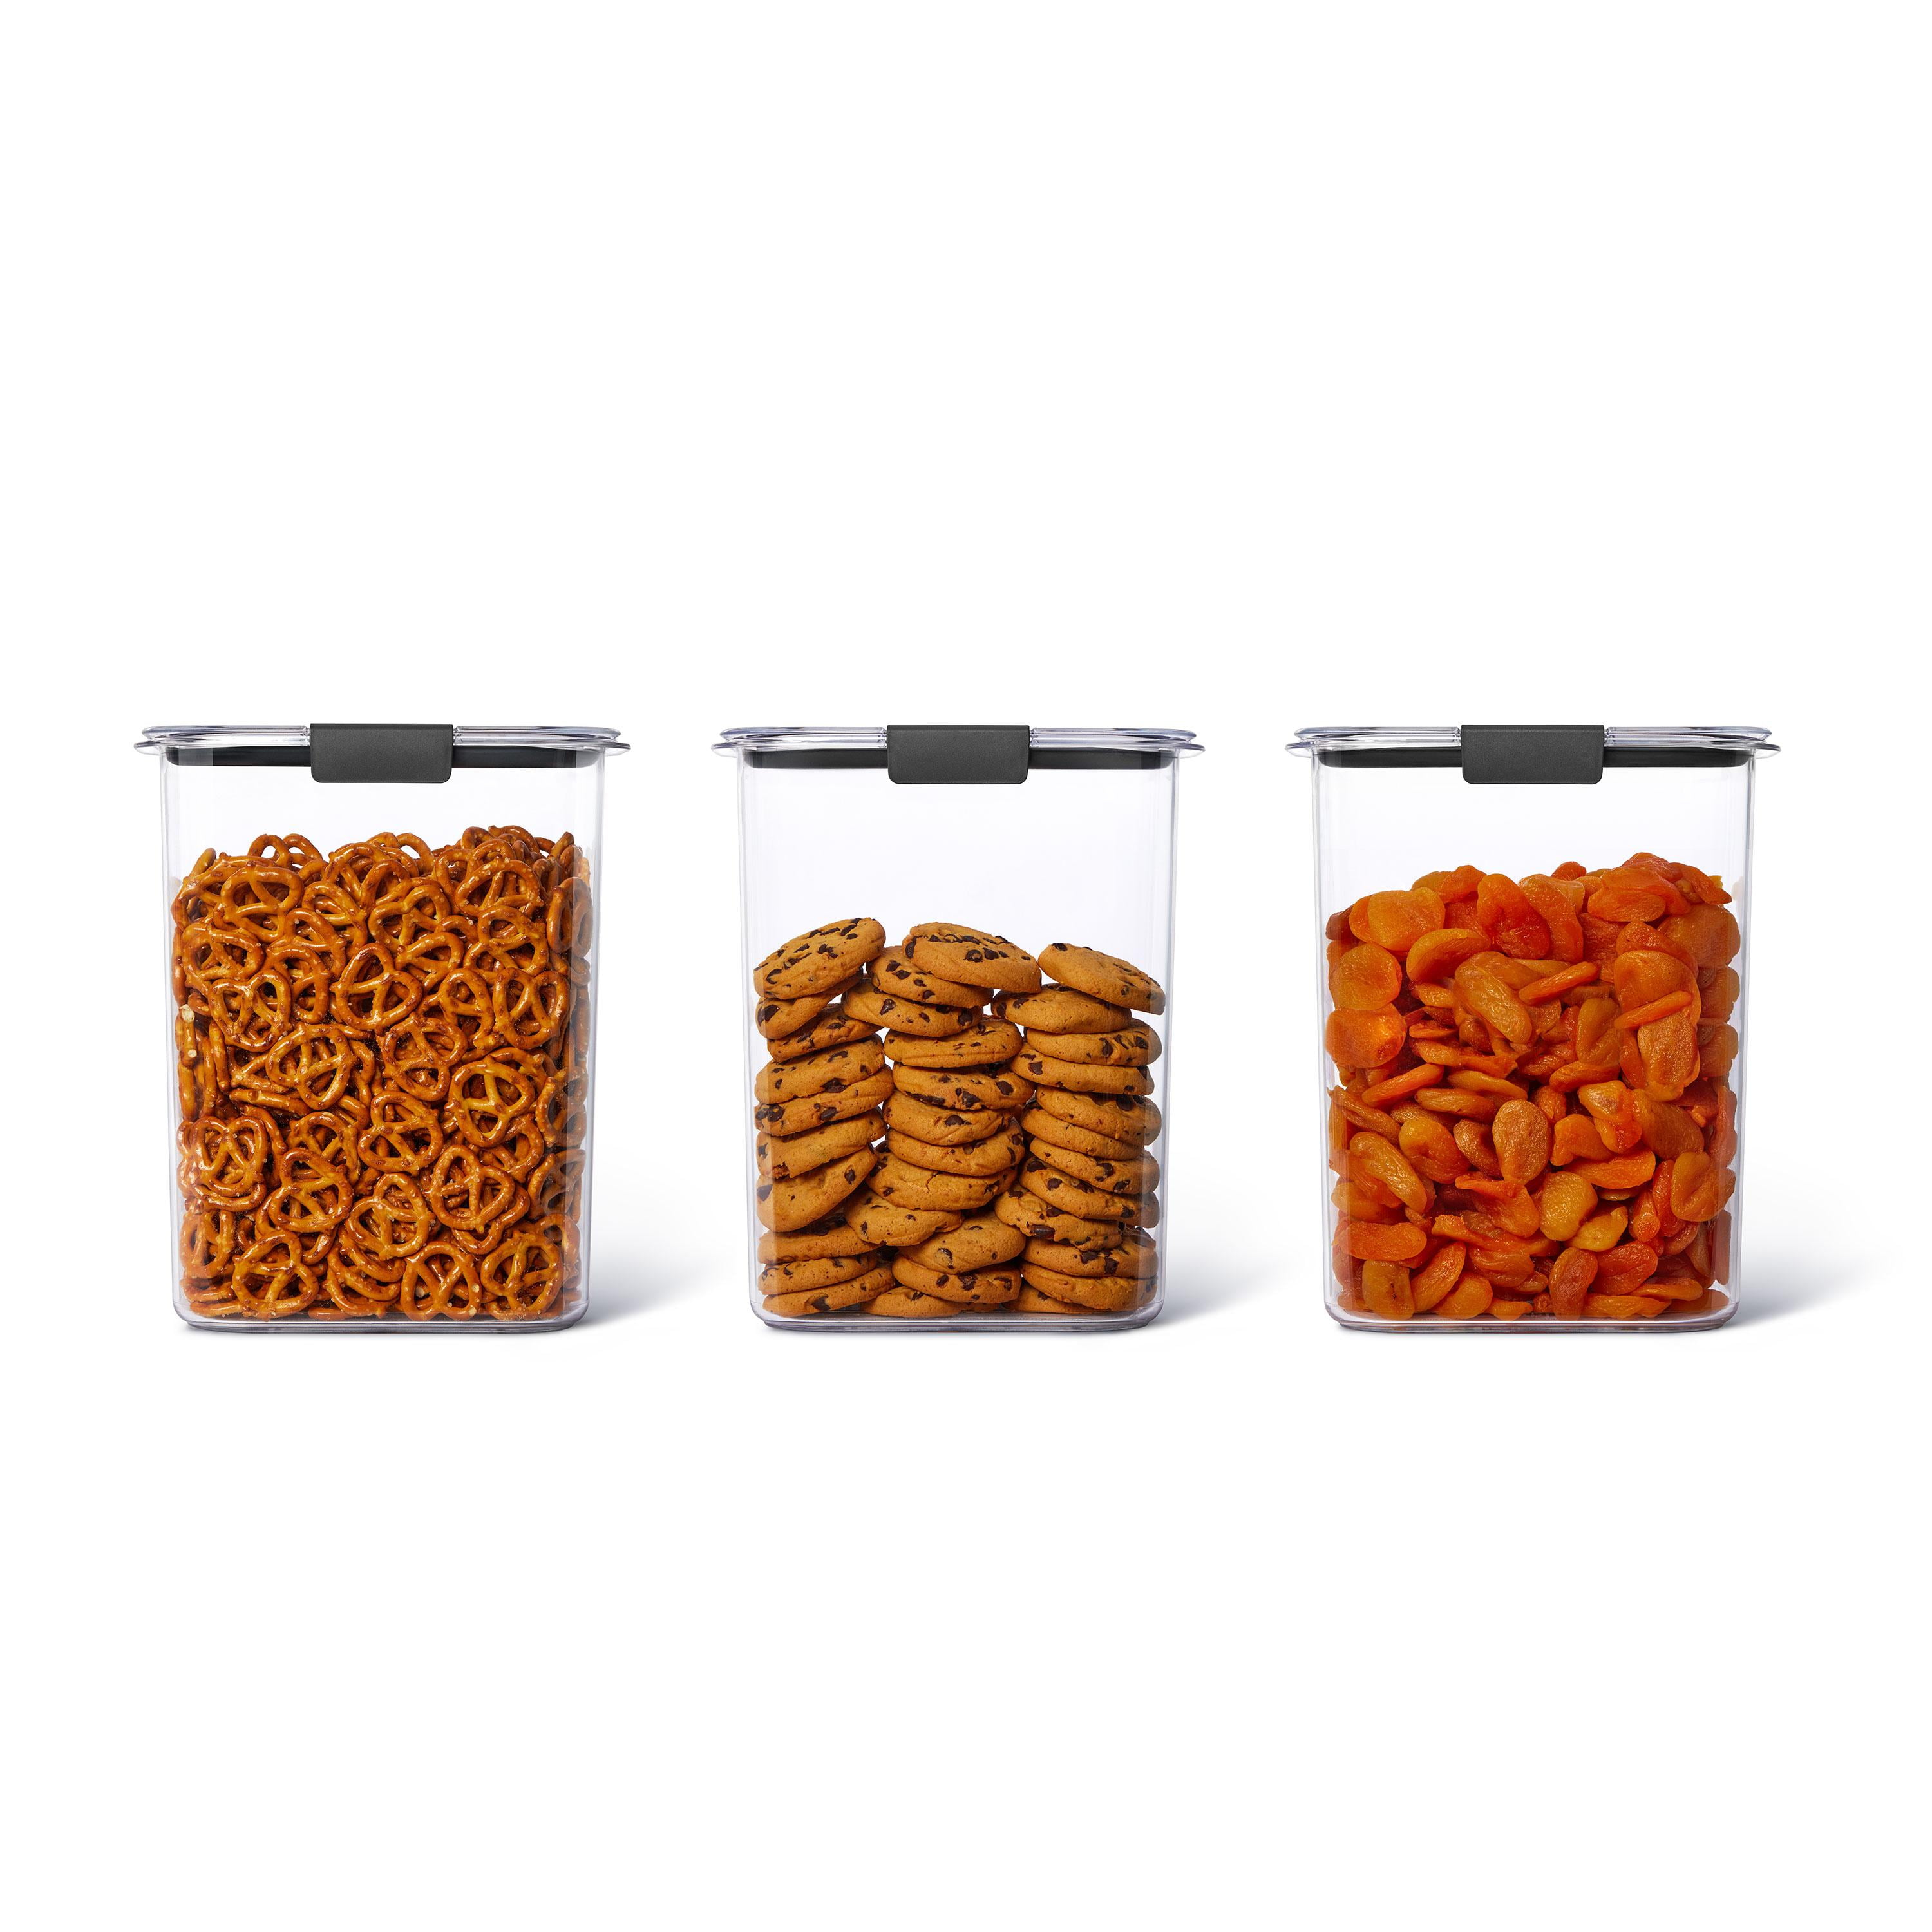 3 Pc Food Storage Container Cereal Dispenser Clip Lid Animal Dry Food Rice Pasta 